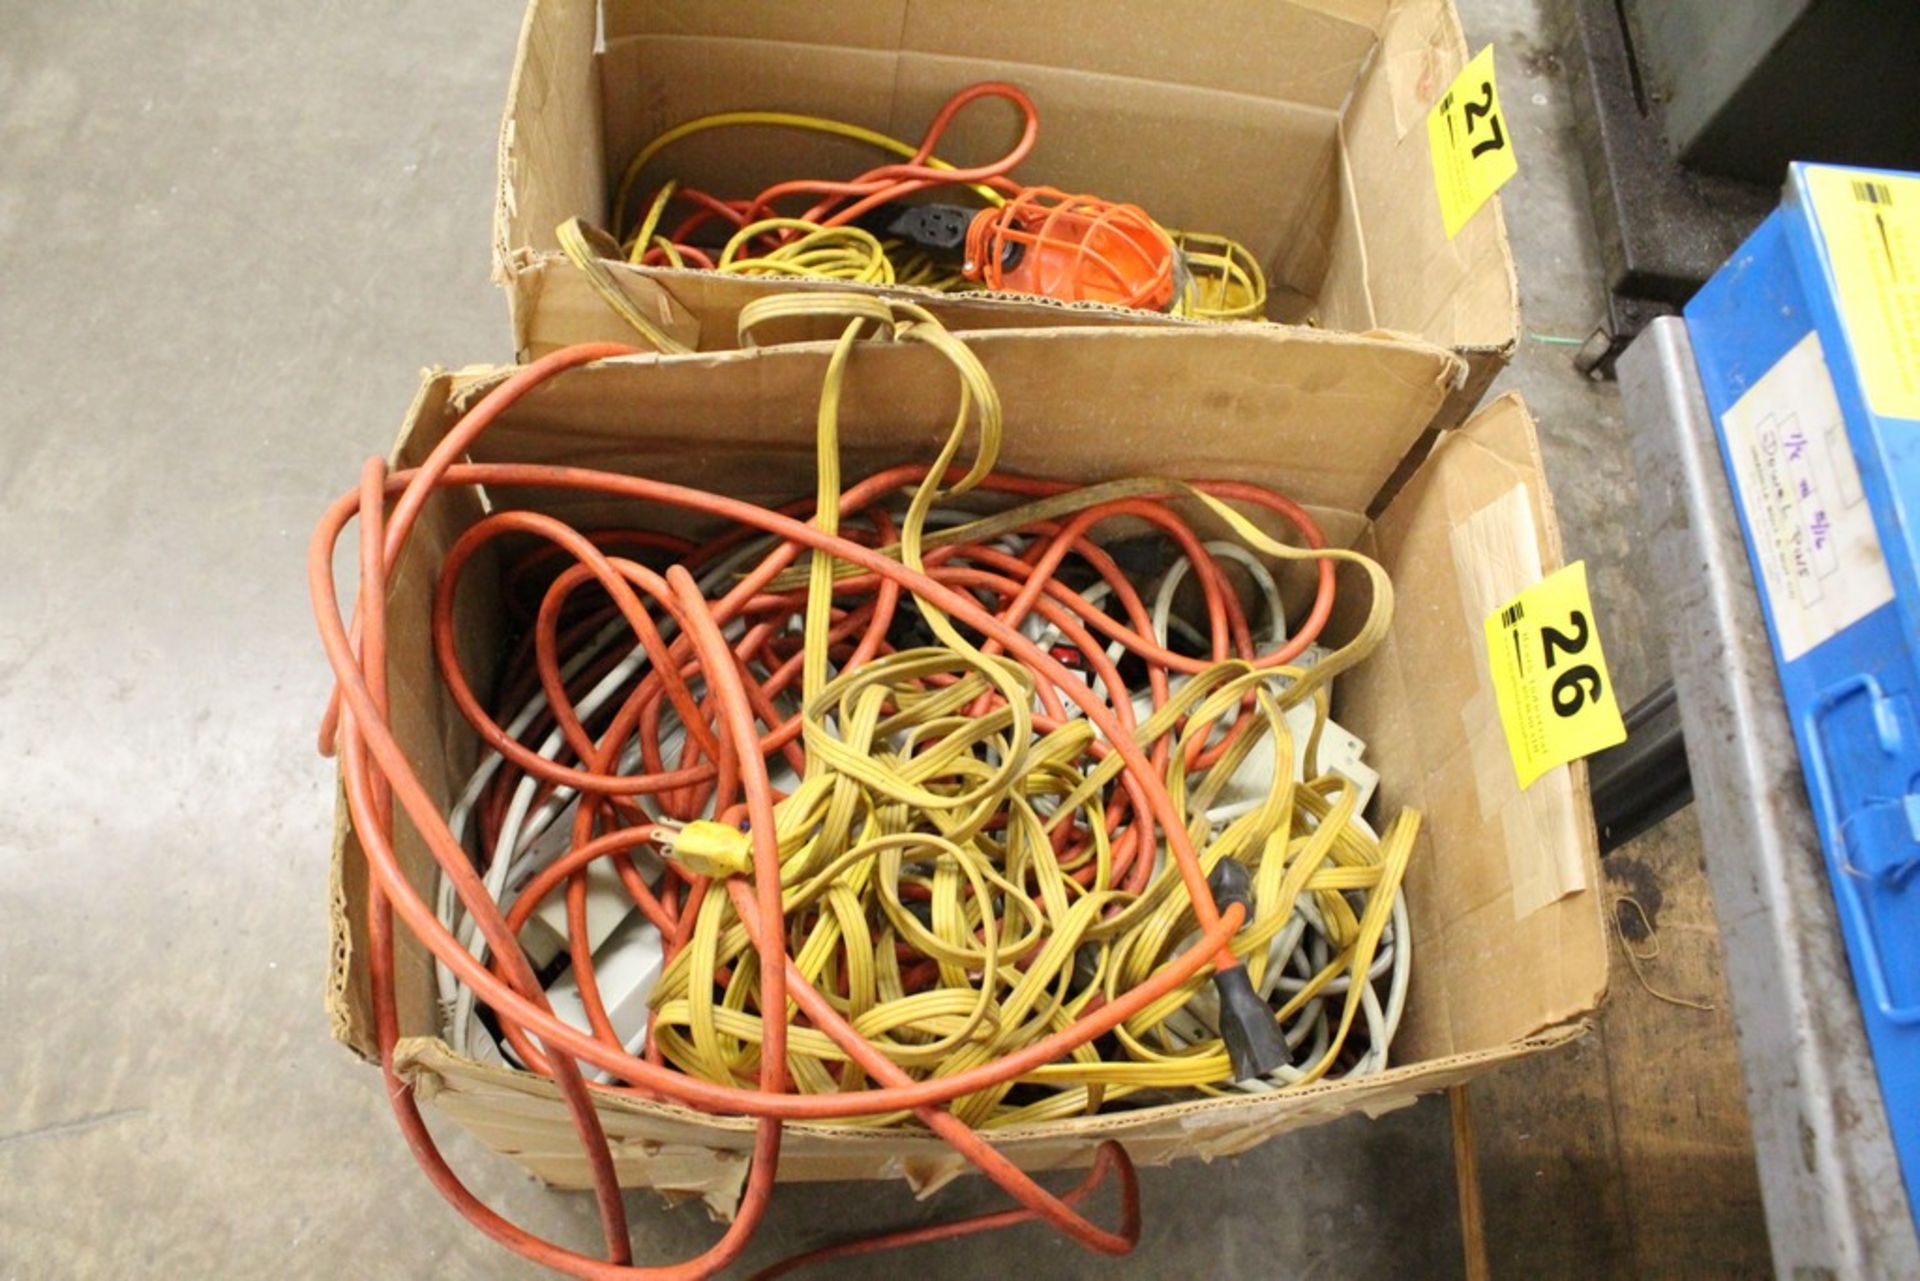 LARGE QTY OF EXTENSION CORDS & OUTLET STRIPS IN BOX